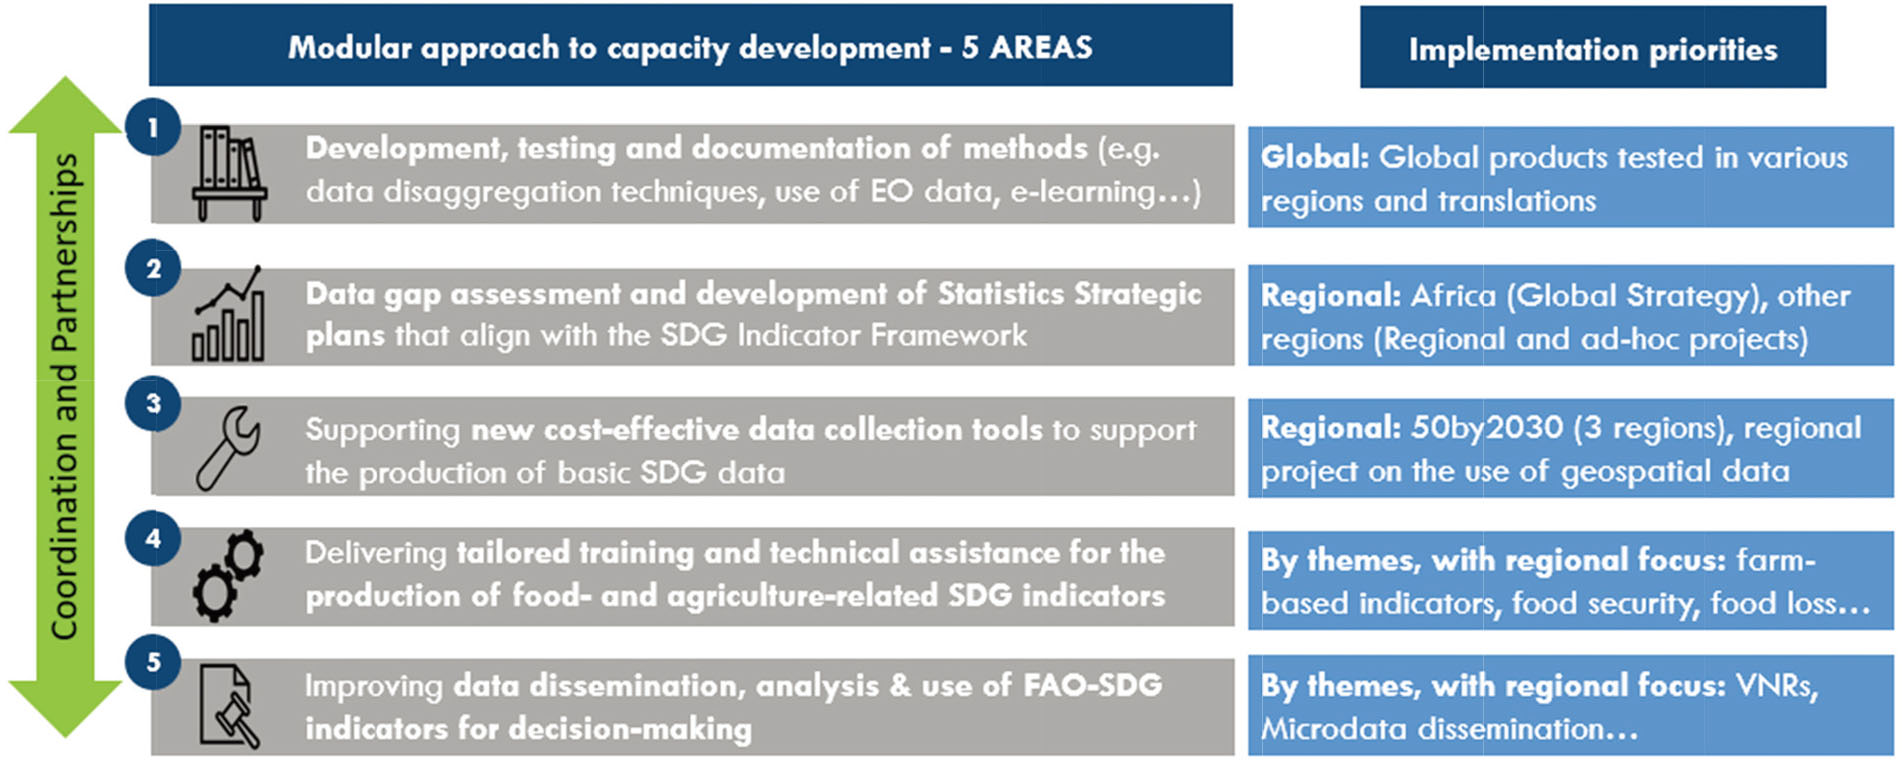 FAO Umbrella Programme on Measuring the SDGs. Note: This figure shows FAO’s strategy to improve the capacity of countries on SDG monitoring. The strategy, developed as a modular approach, foresees 5 areas of work where the implementation will be supported by adequate coordination and partnerships. The figure also highlights some of the implementation priorities that have been set in order to address the main gaps in SDG standard uptake, as presented in the previous section.